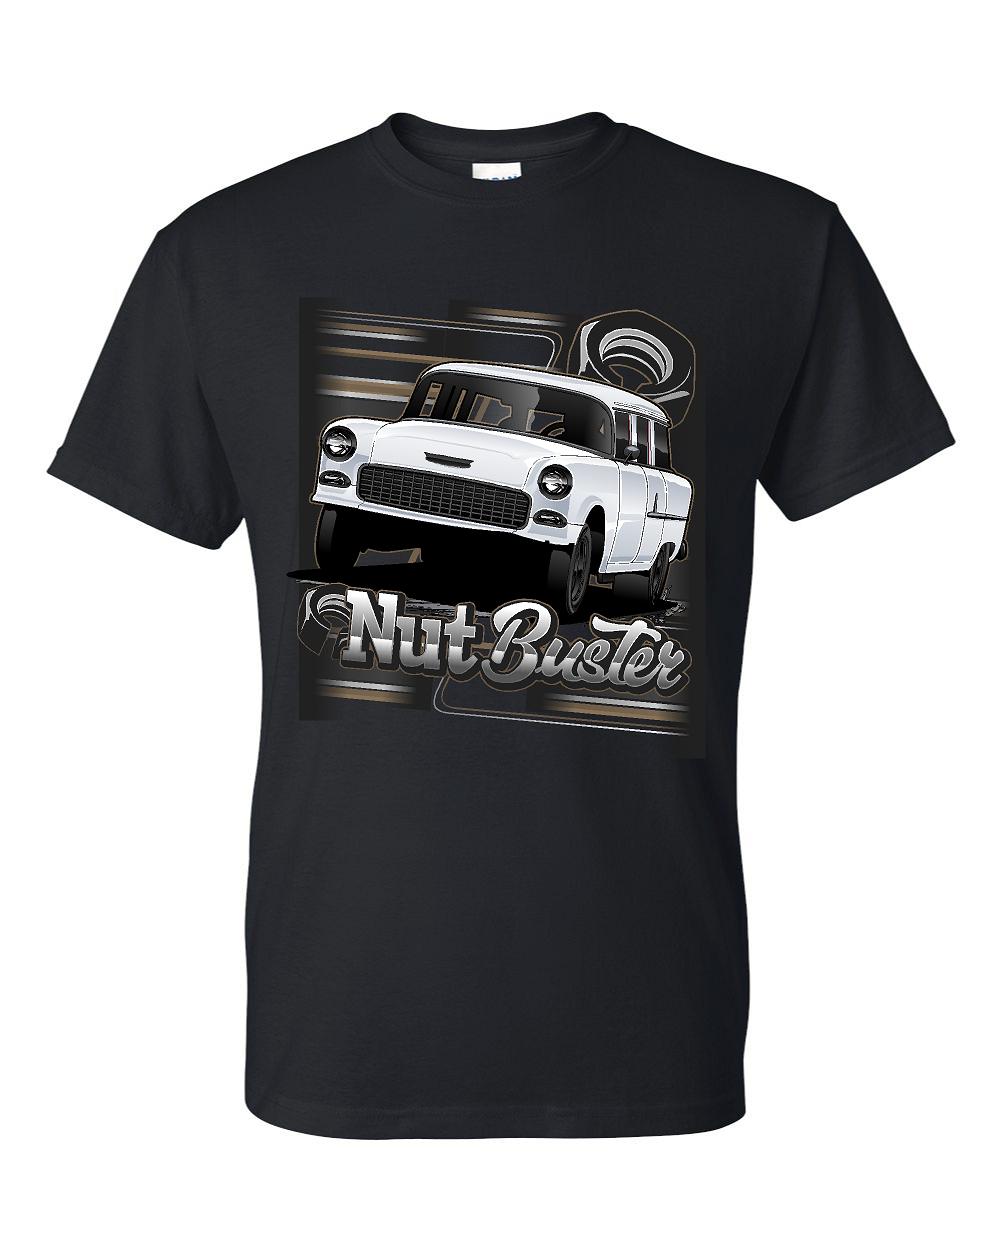 Nut Buster Shirts